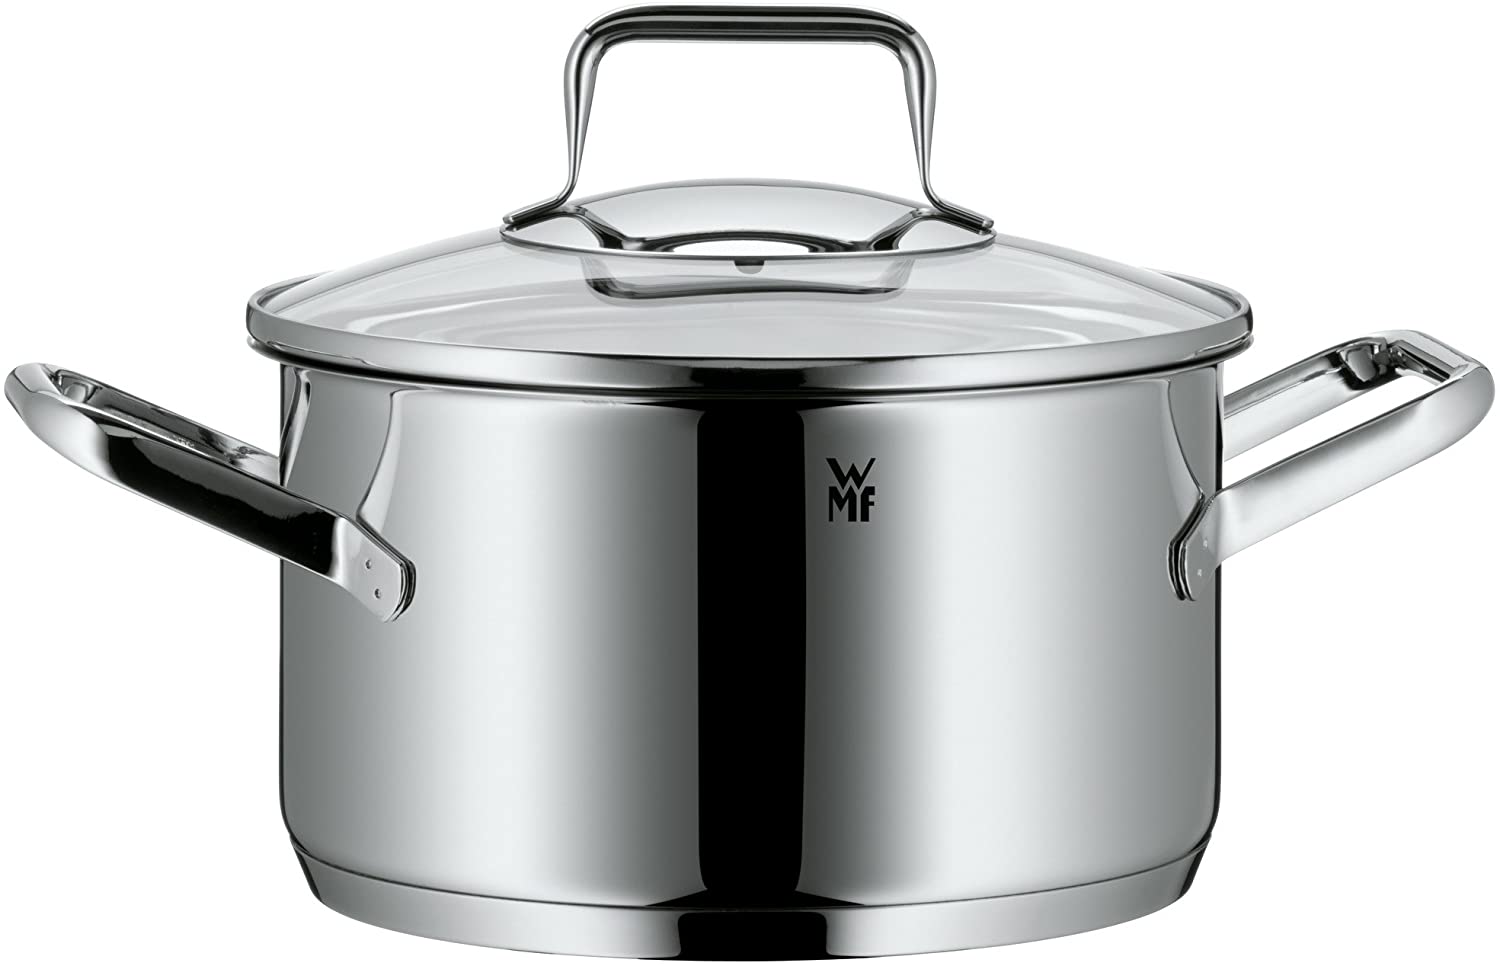 WMF 20 cm Stainless Steel Trend High Casserole with Lid